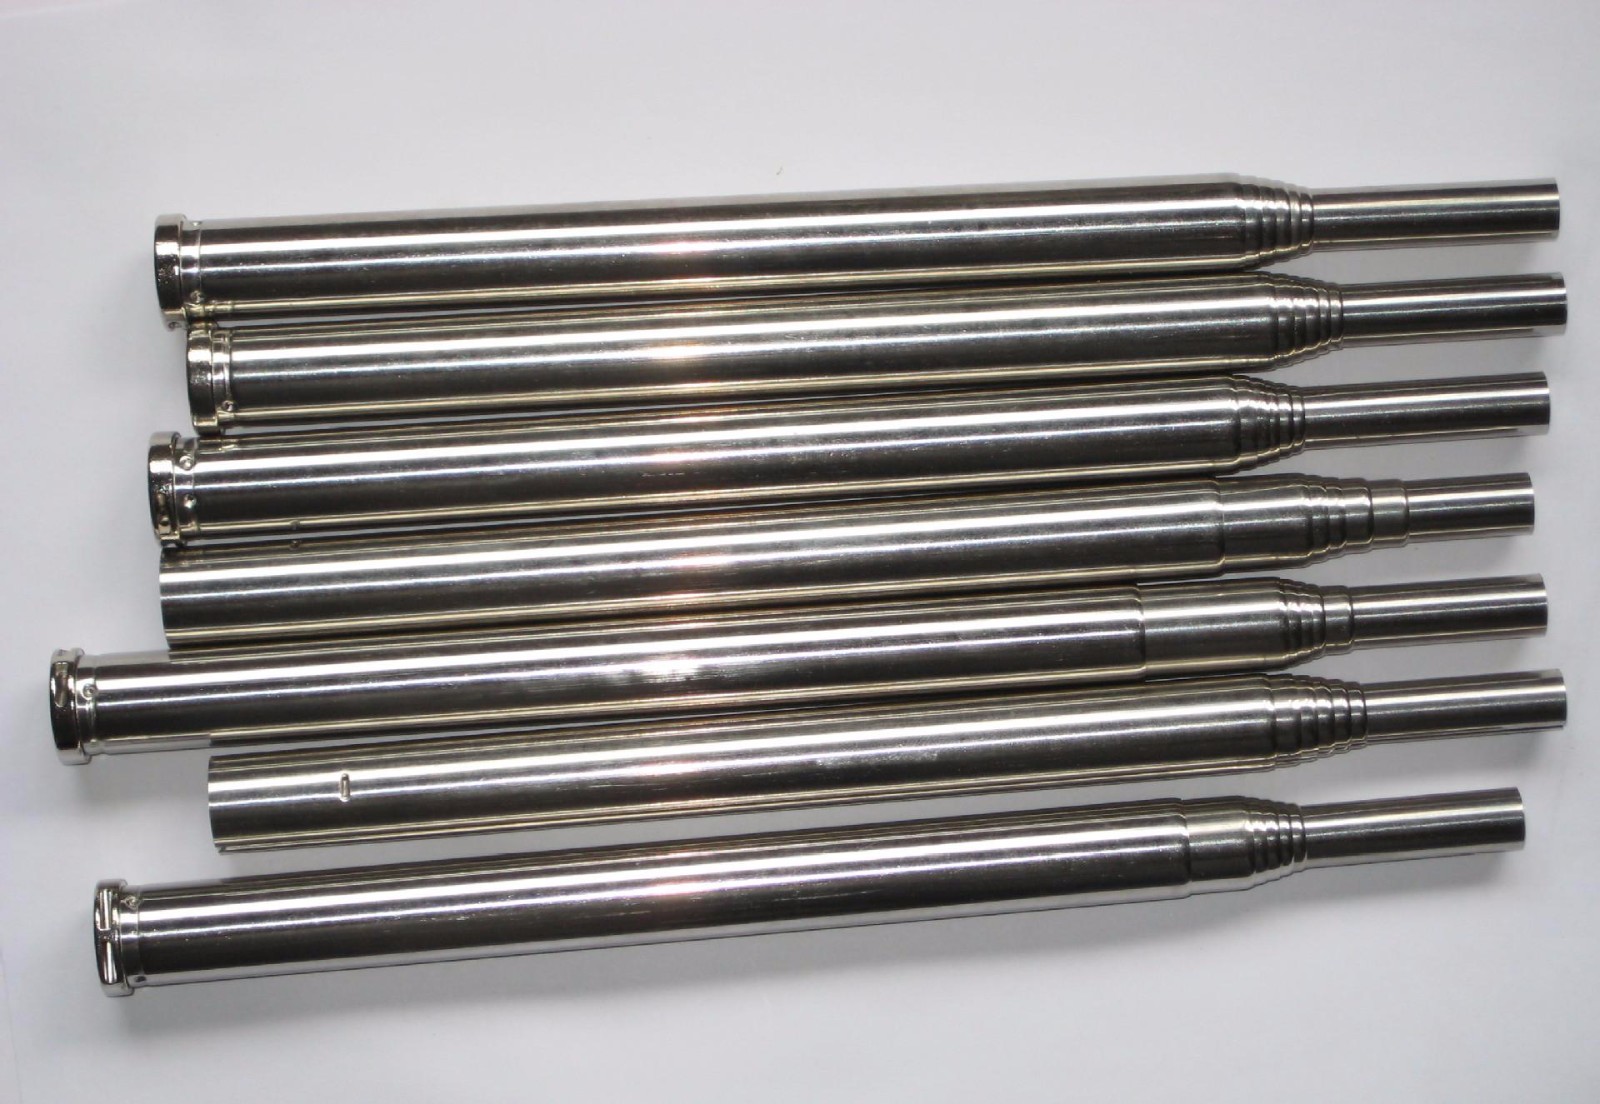 Stainless Steel Telescopic Tubing/Stainless Steel Telescopic Piping How Can I Make Telescoping Steel Tubing